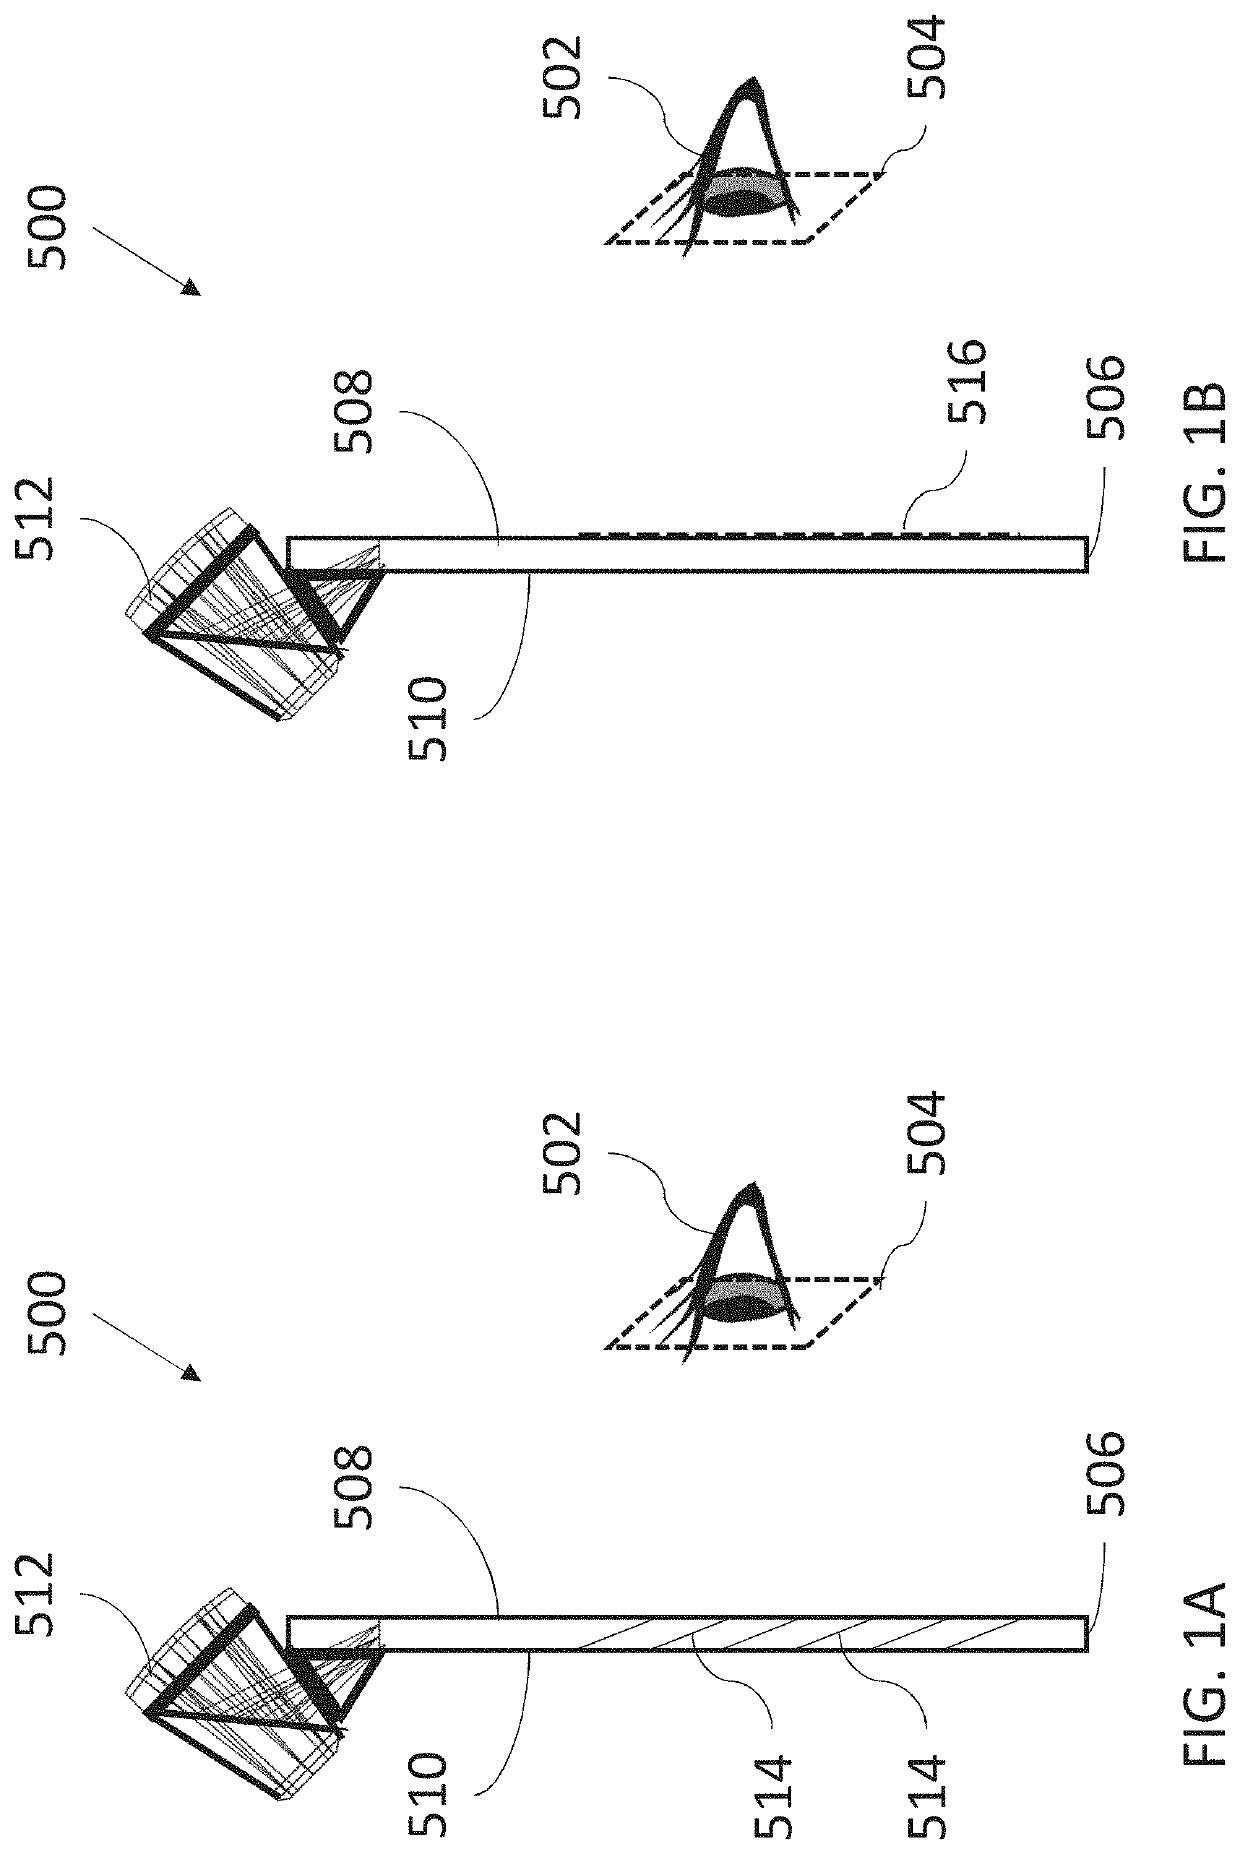 Display with foveated optical correction